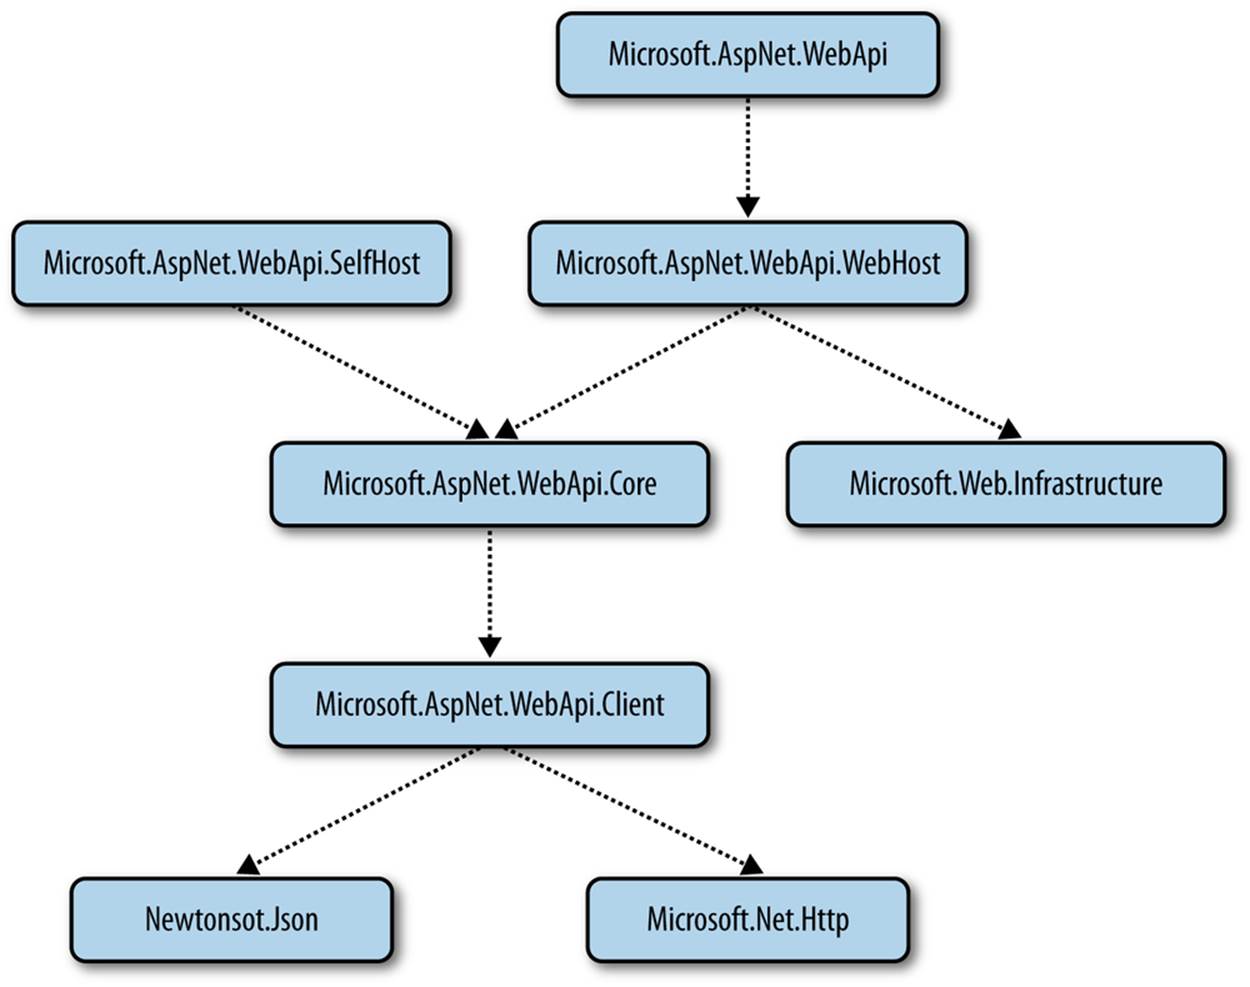 NuGet package hierarchy for Web API